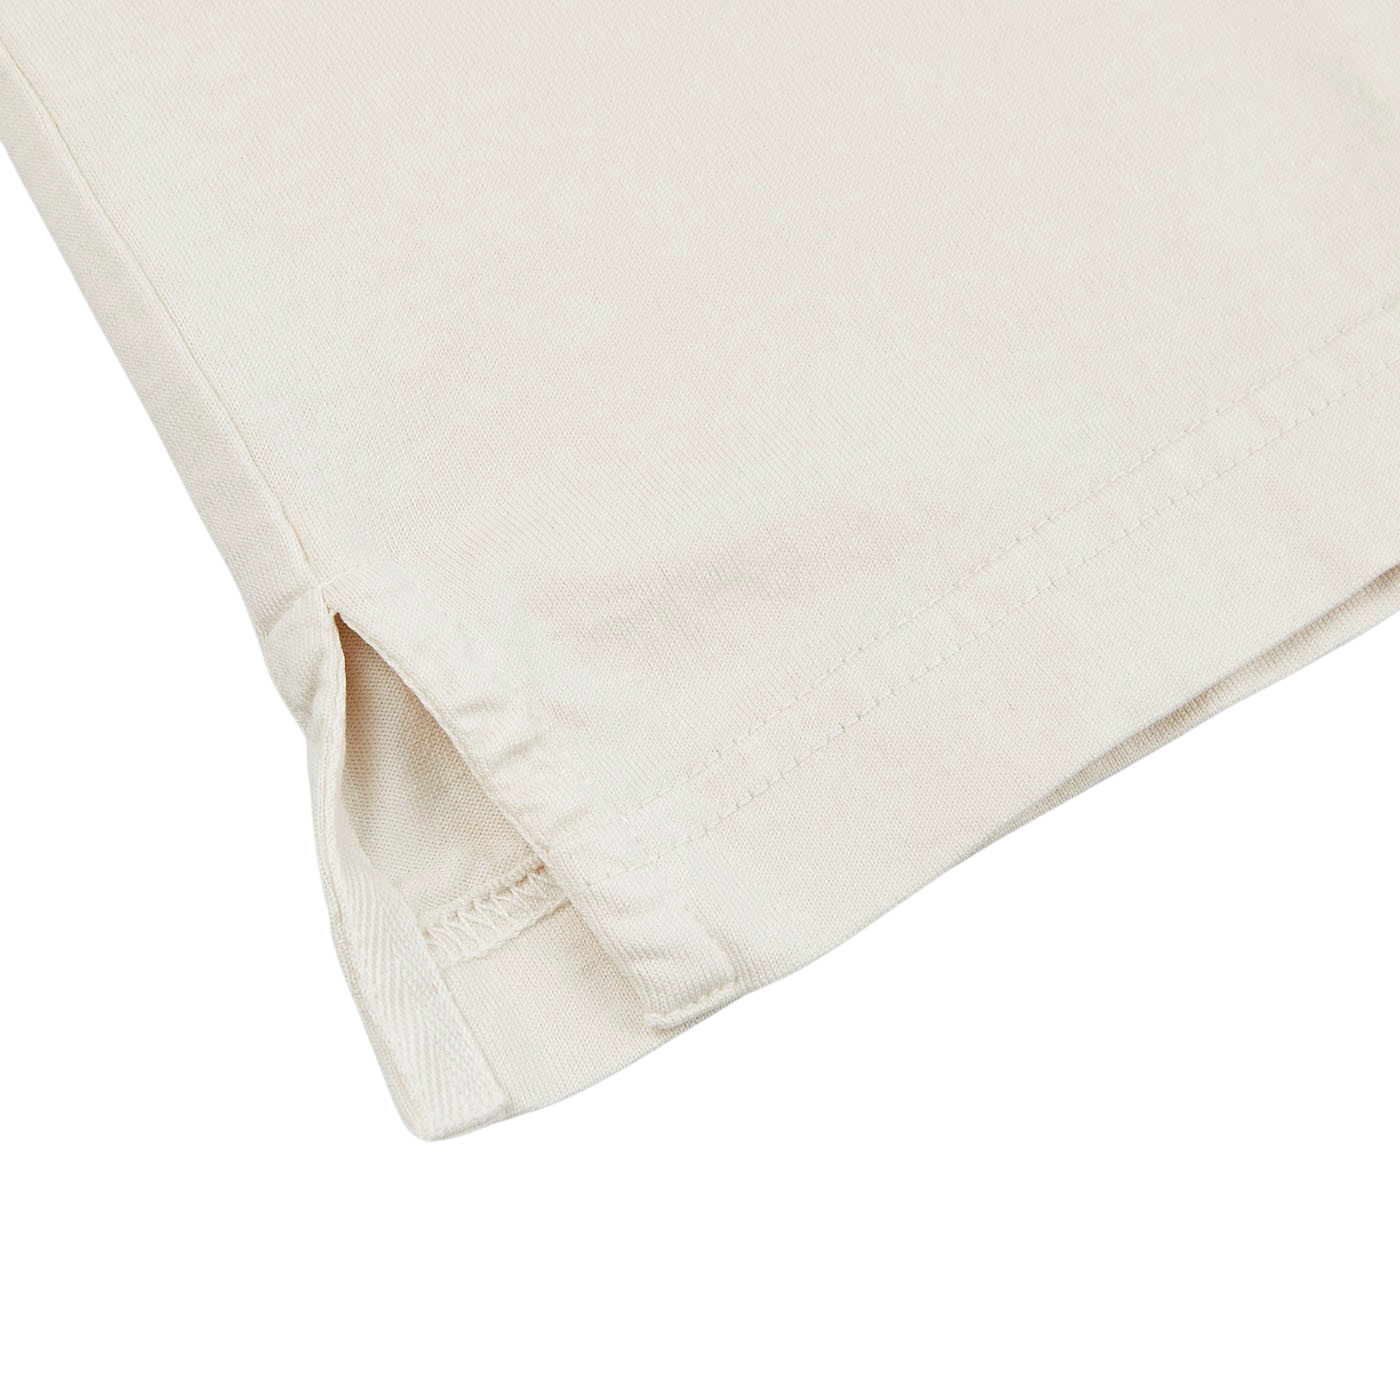 A luxury casual wear producer presents a close up of a Cream Beige Organic Cotton LS polo shirt by Fedeli, made with the finest cotton jersey fabric in a crisp white color.